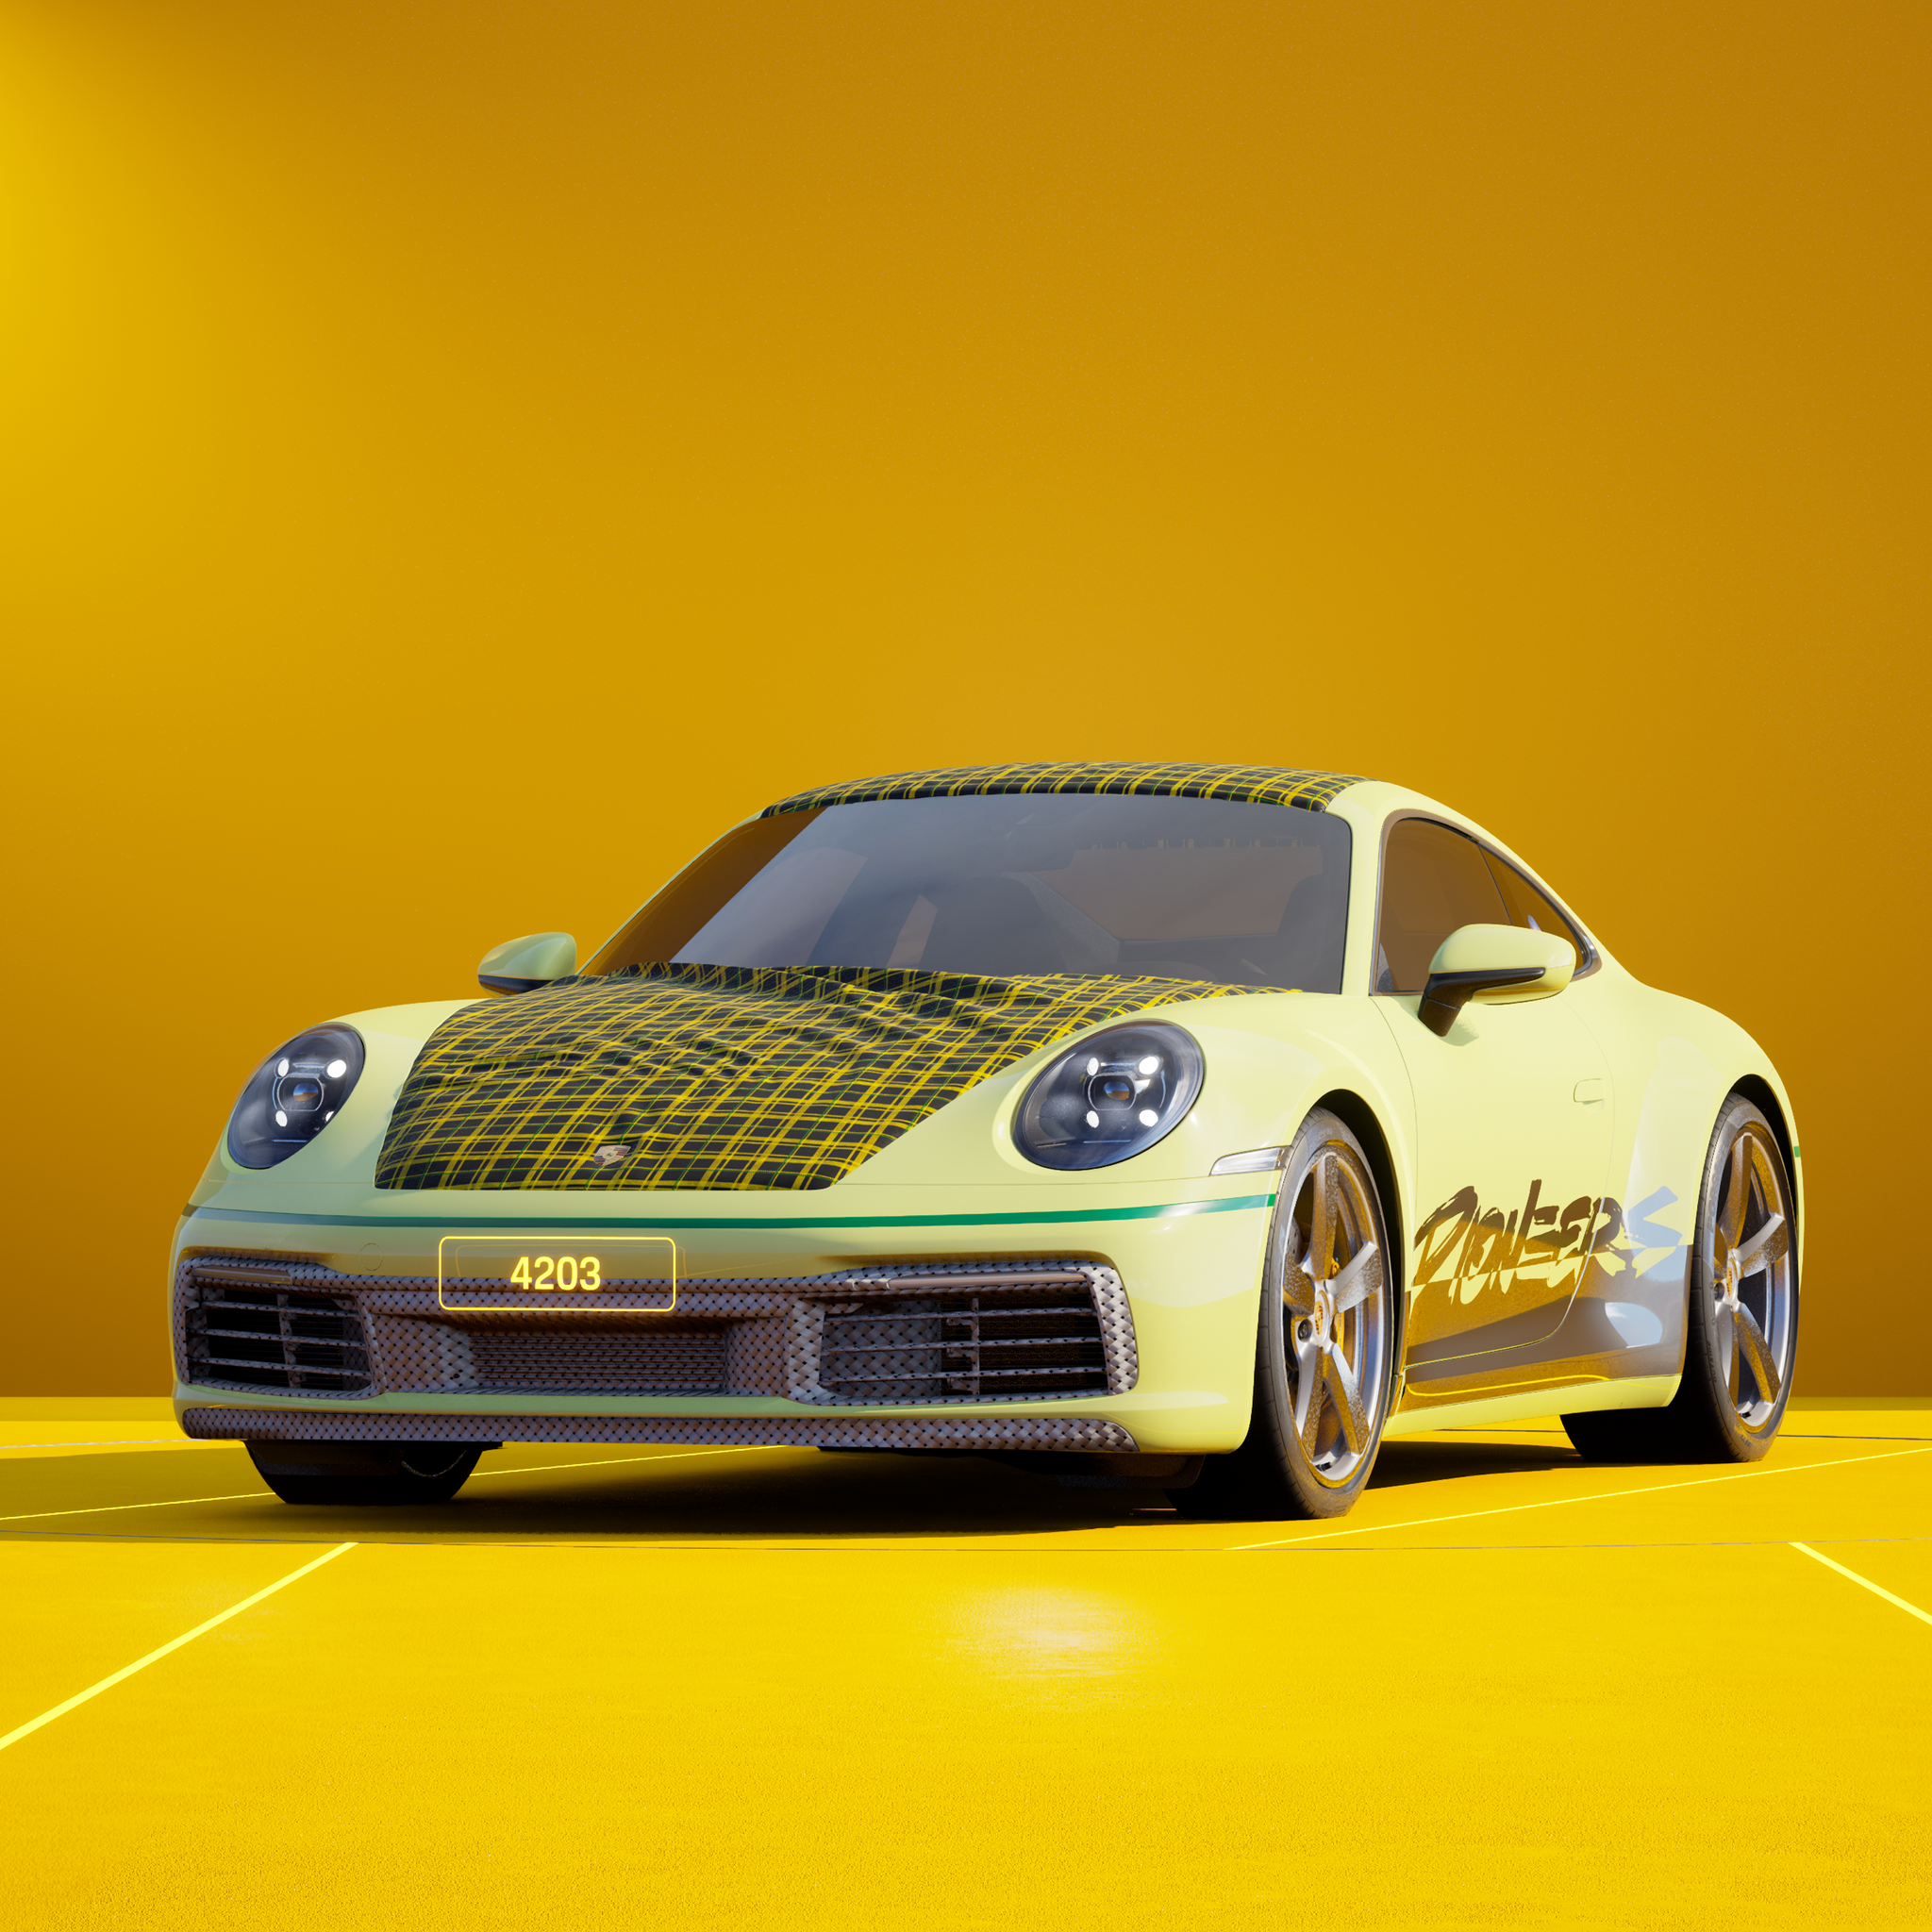 The PORSCHΞ 911 4203 image in phase